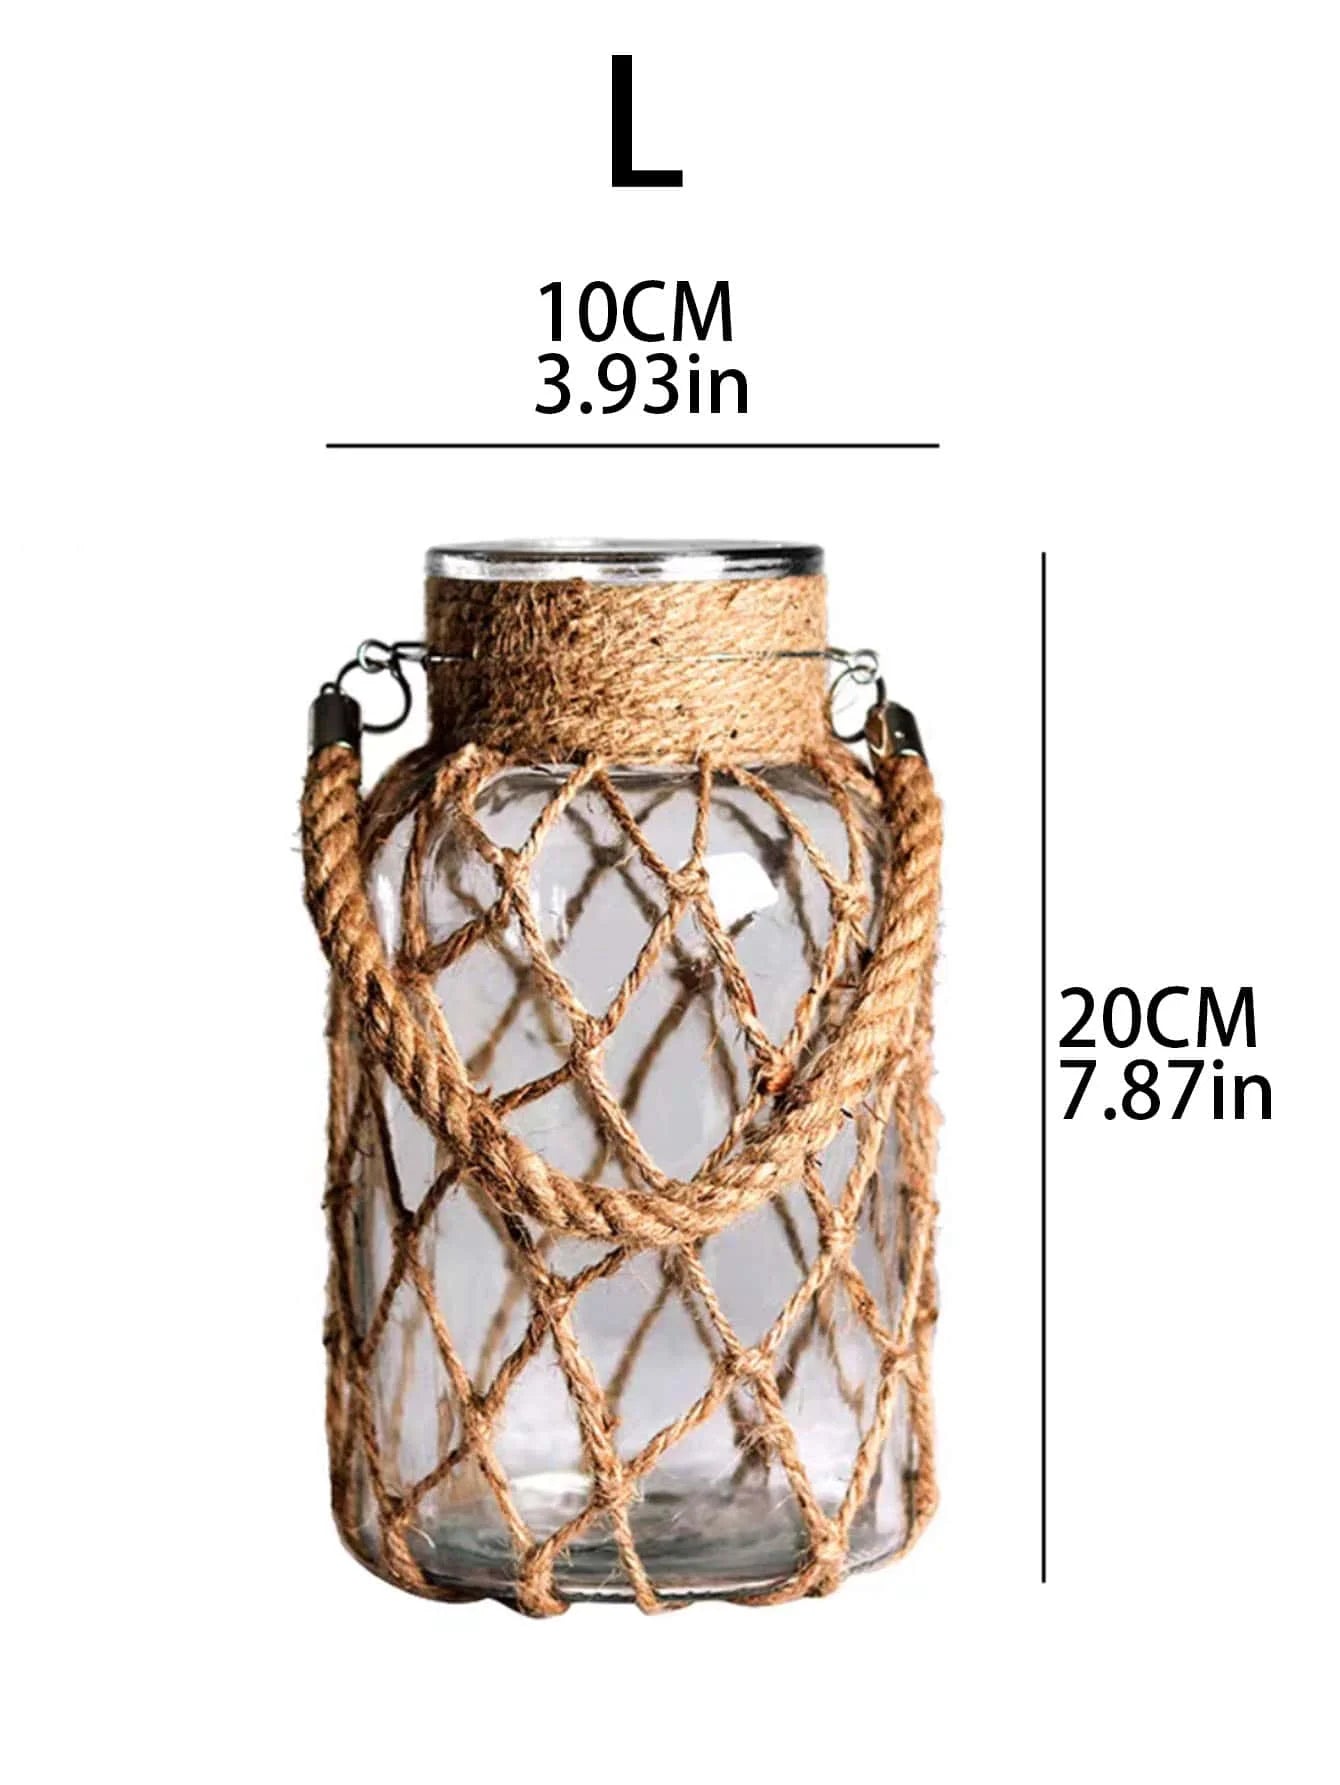 Rustic Hanging Glass Vase Rope Net Dry Flower Glass Vase with Art Hemp Rope  Home Transparent Living Room Decor Table Decoration